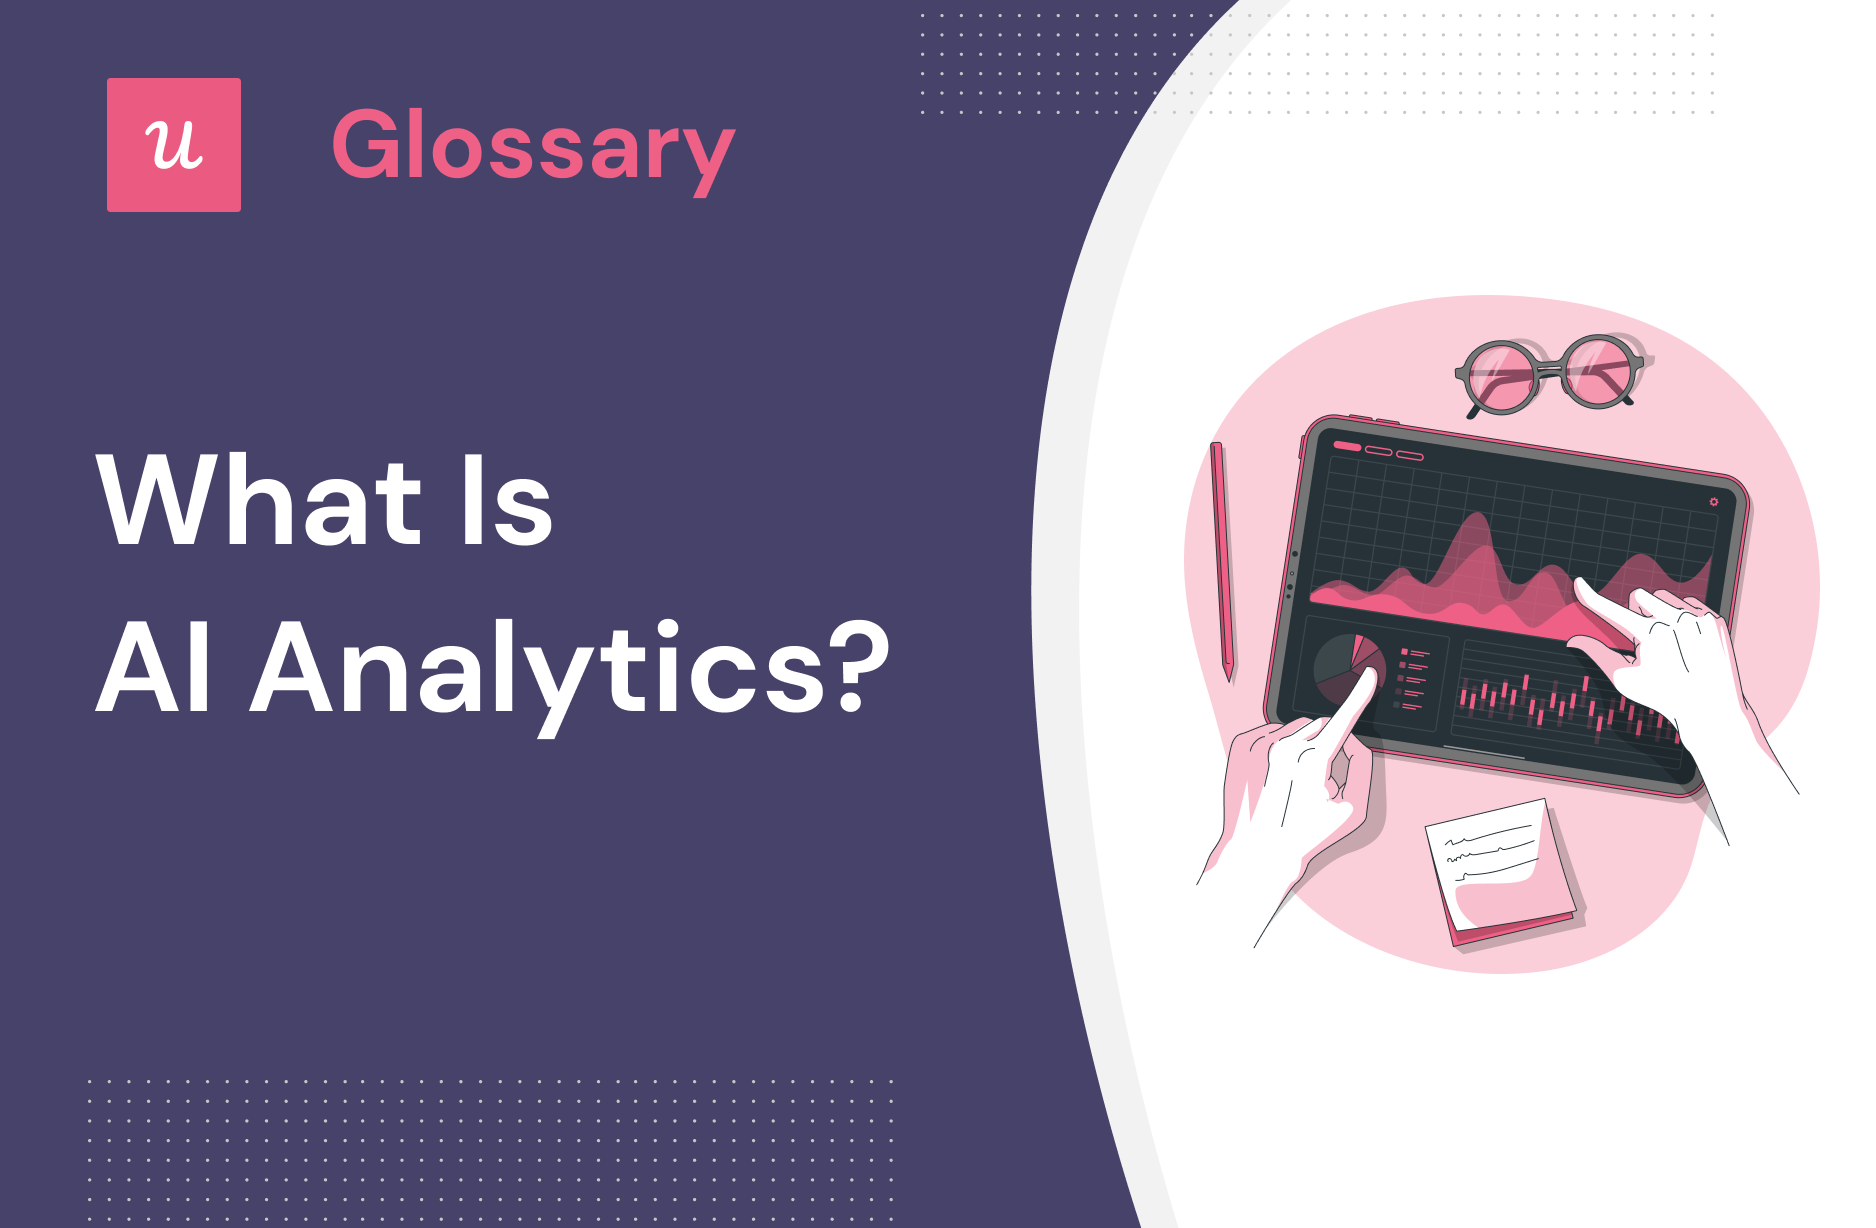 What is AI Analytics?